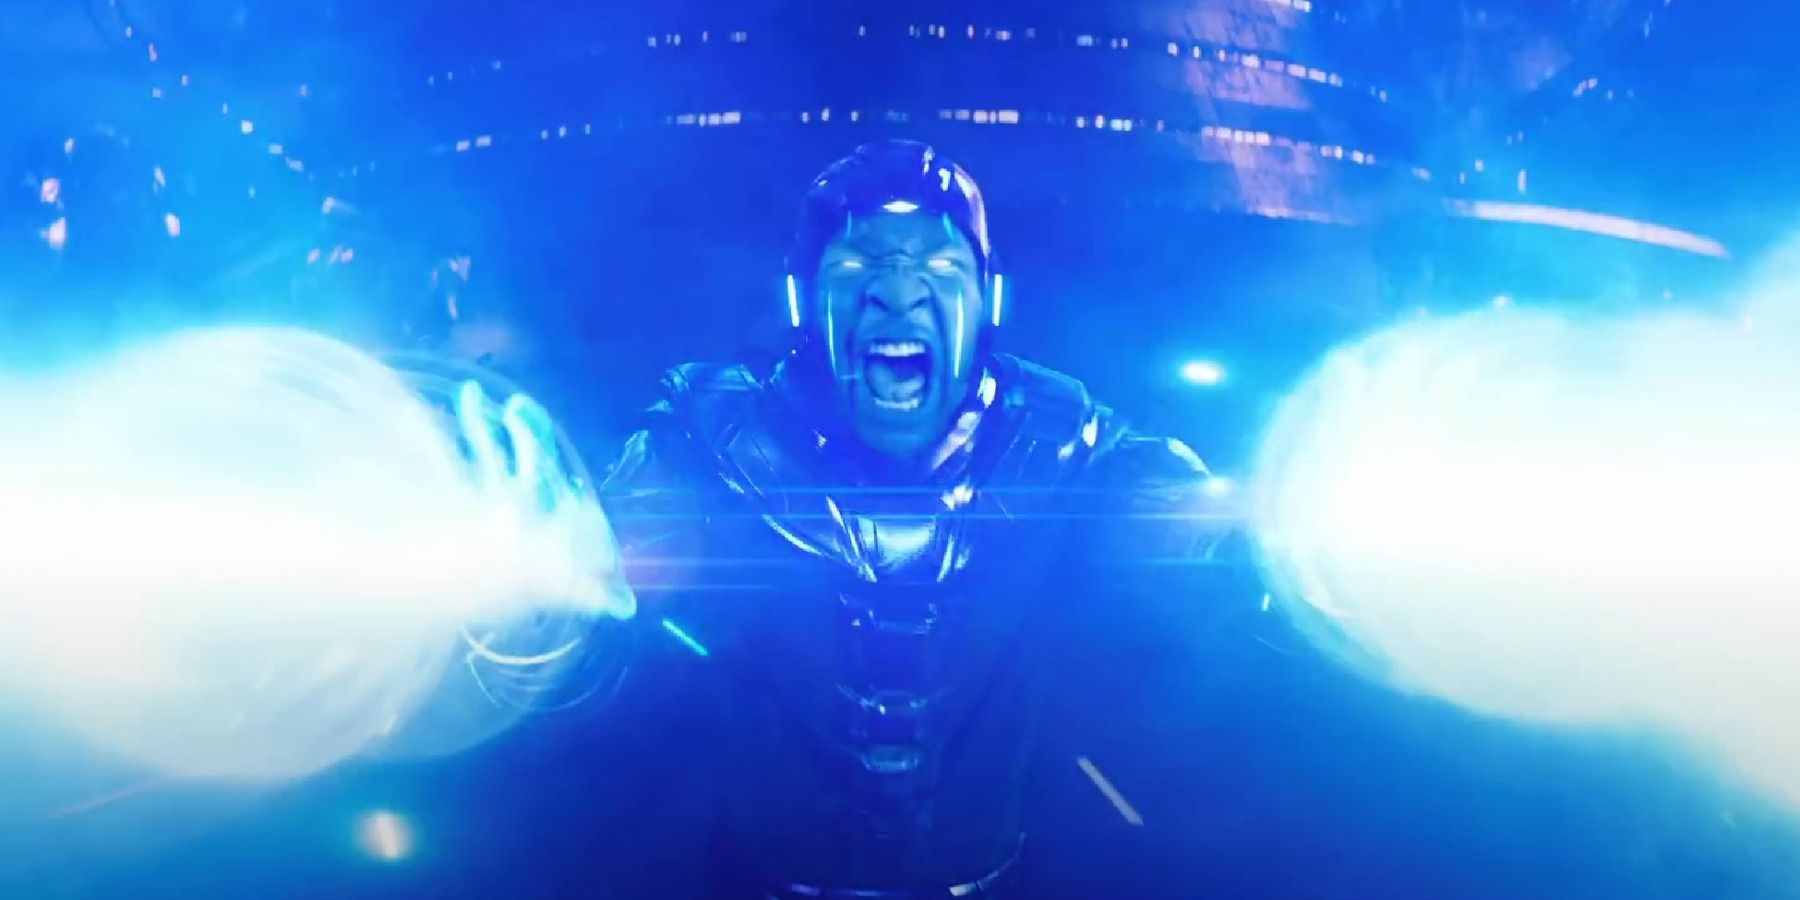 Kang the Conqueror blasting blue energy in Ant-Man And The Wasp: Quantumania